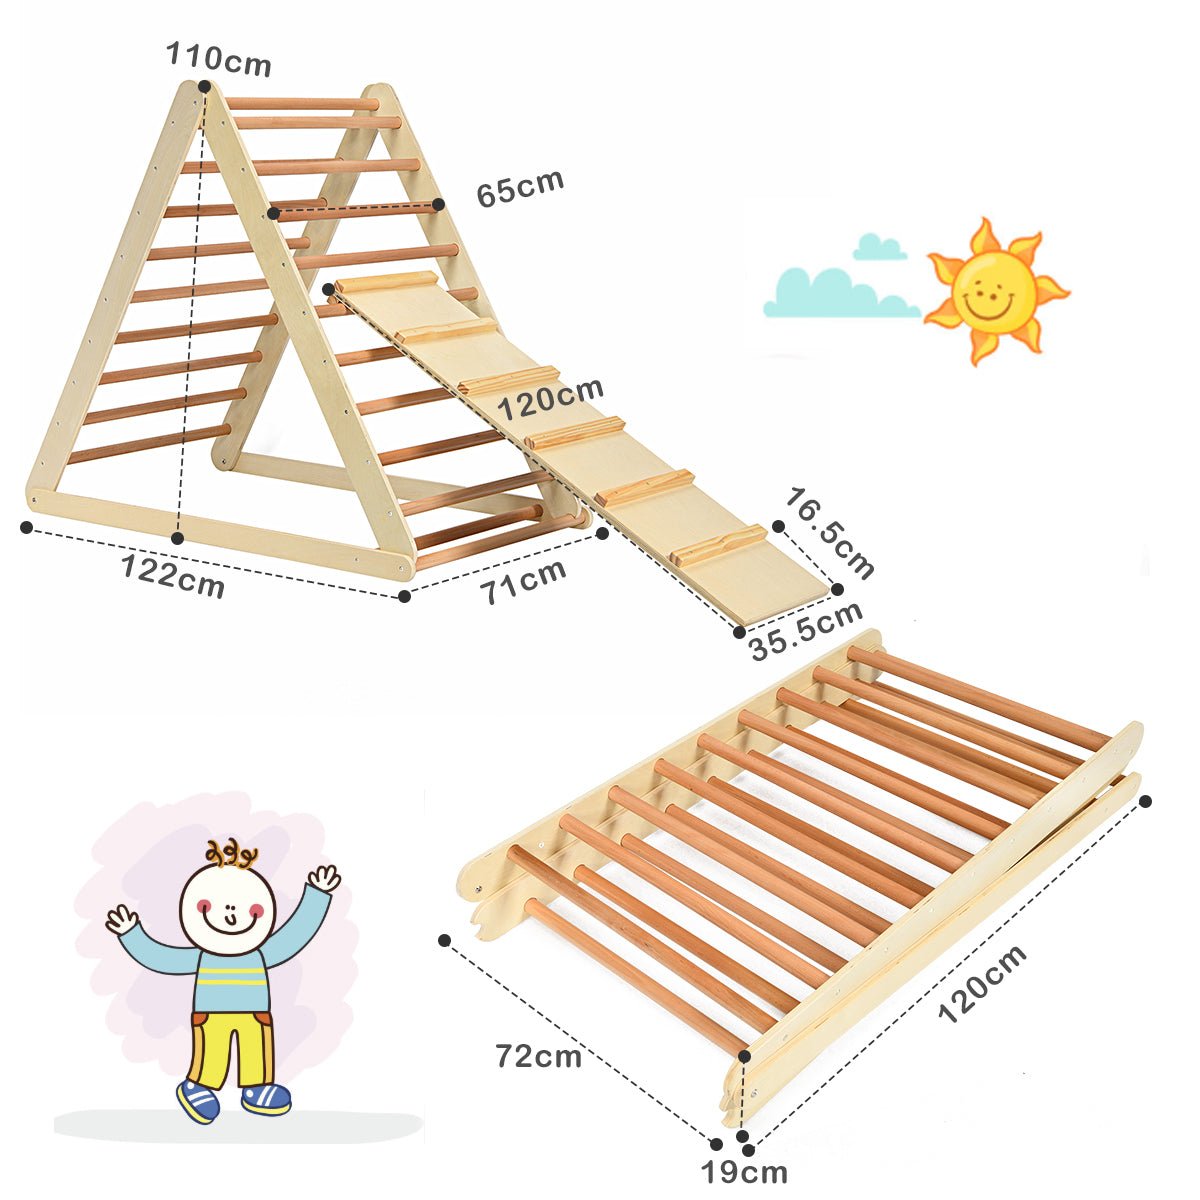 Natural Wooden Climbing Triangle - Secure Ladder for Kids Exploration